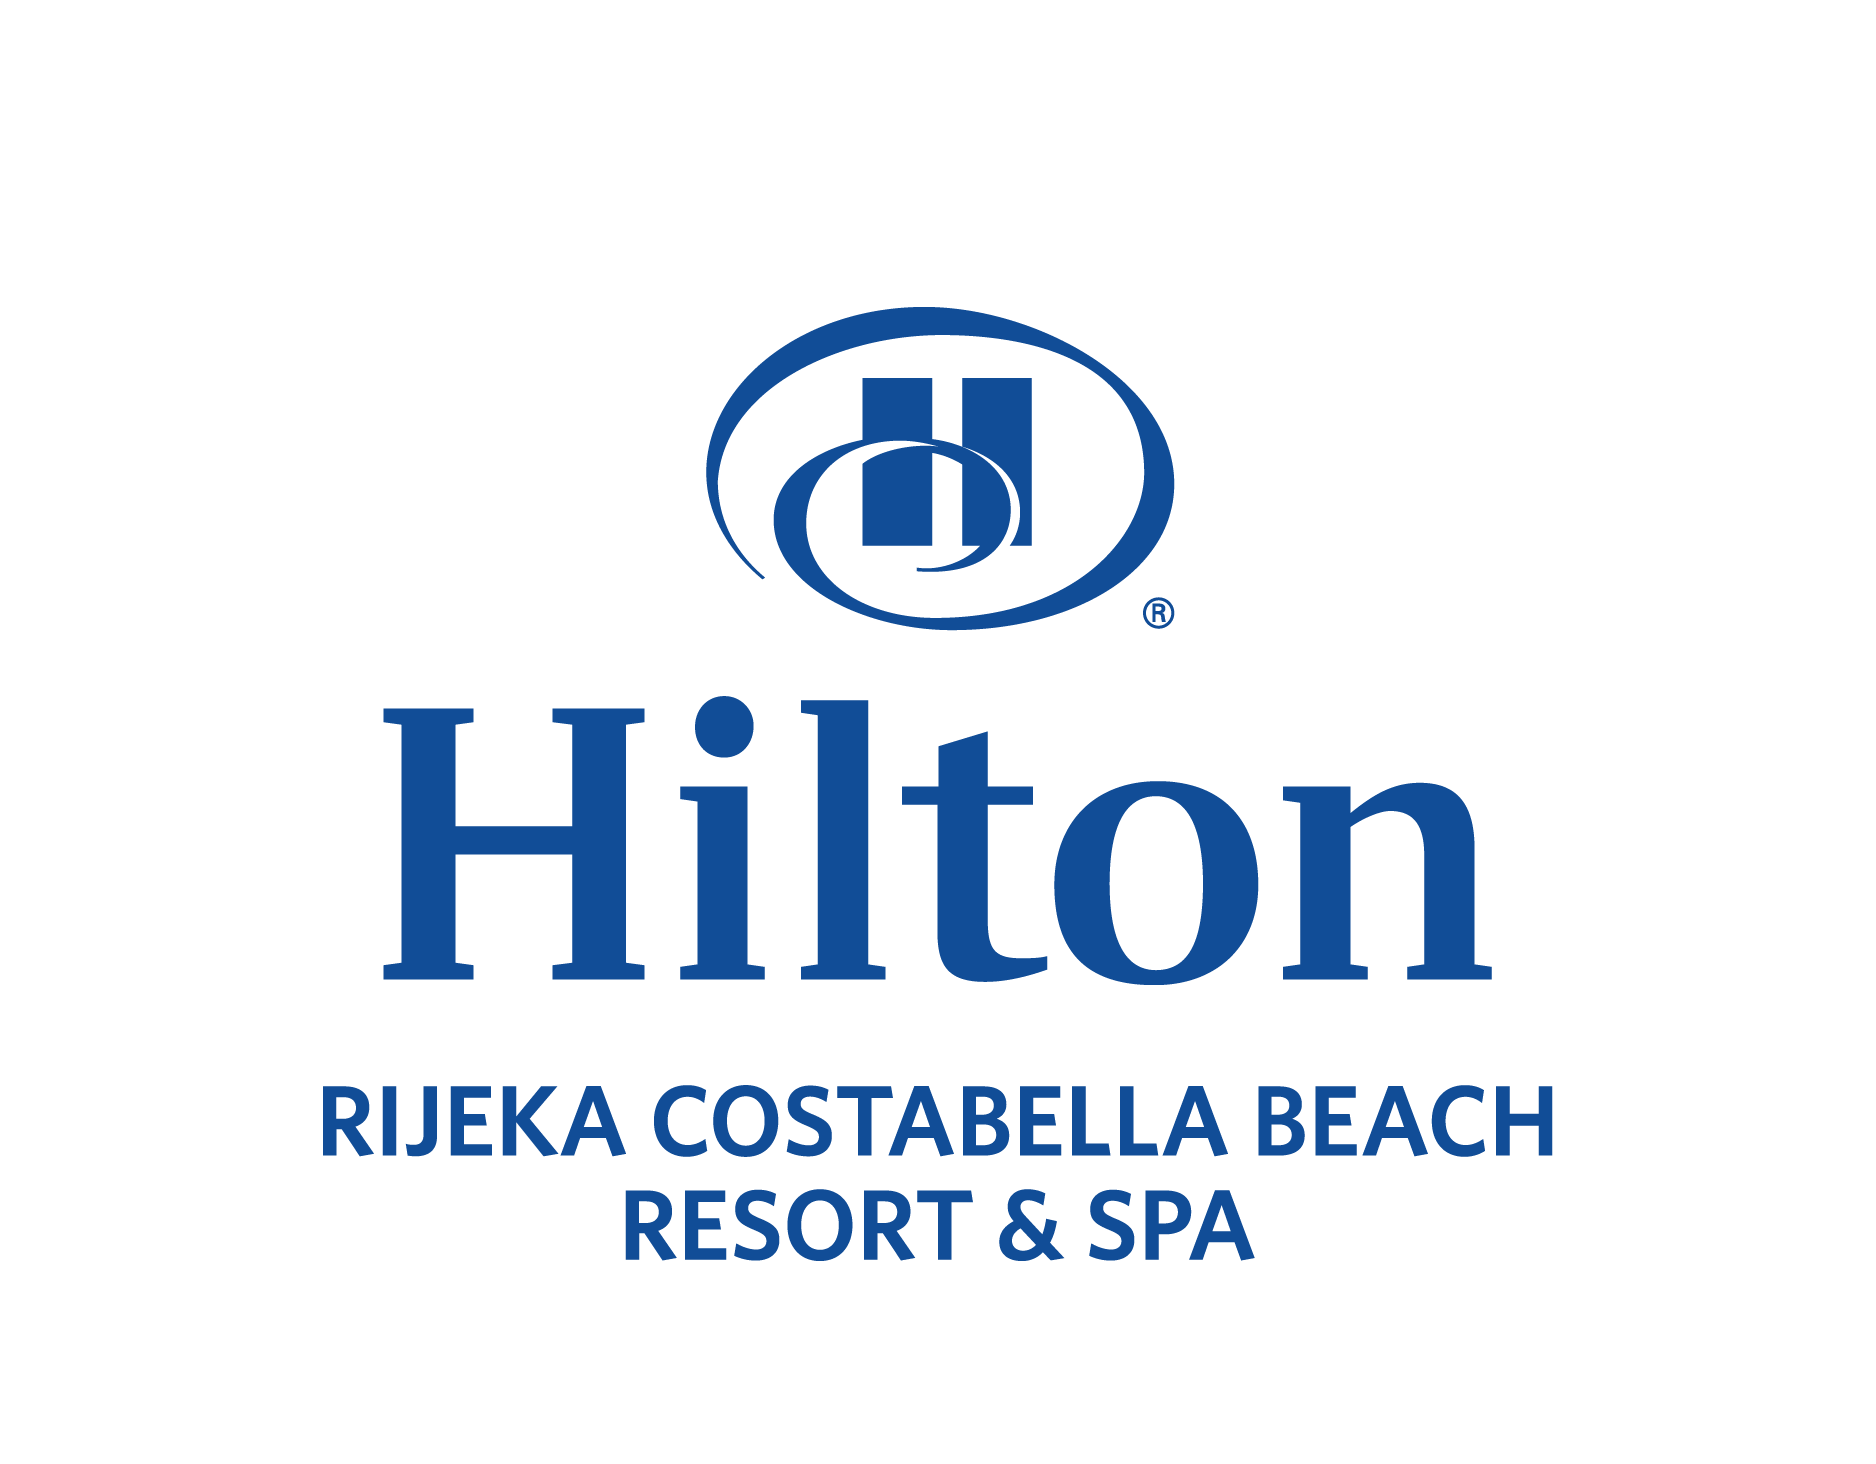 Support as it should be: humane, simple and concrete in meeting challenges! A big thank you to the Hilton Hotel, Costabella!